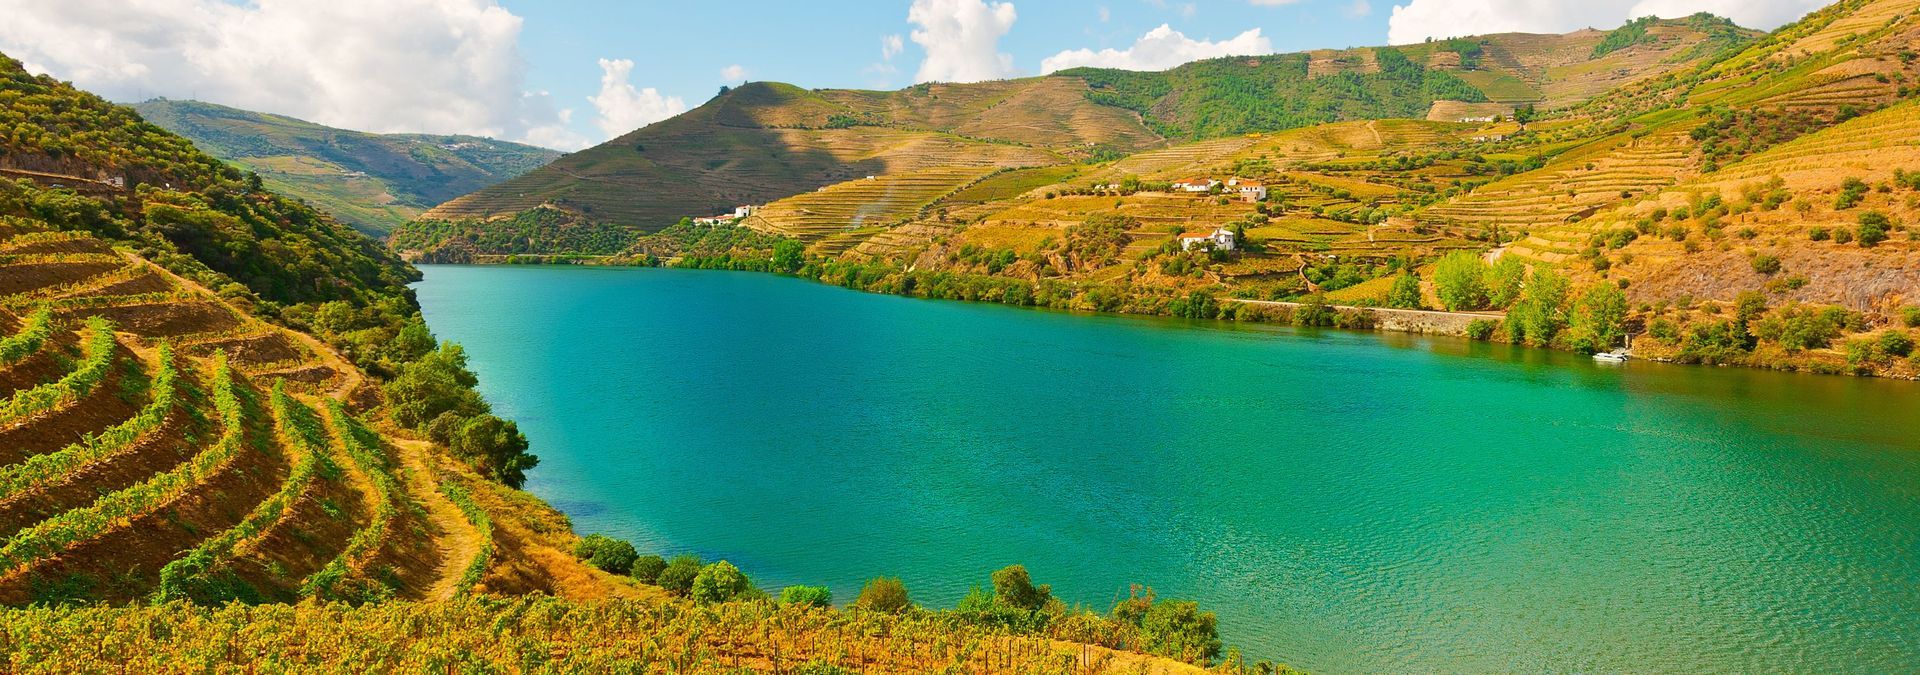 APT Travel Marvel a large body of water surrounded by mountains and vineyards douro valley Portugal Barters Travelnet